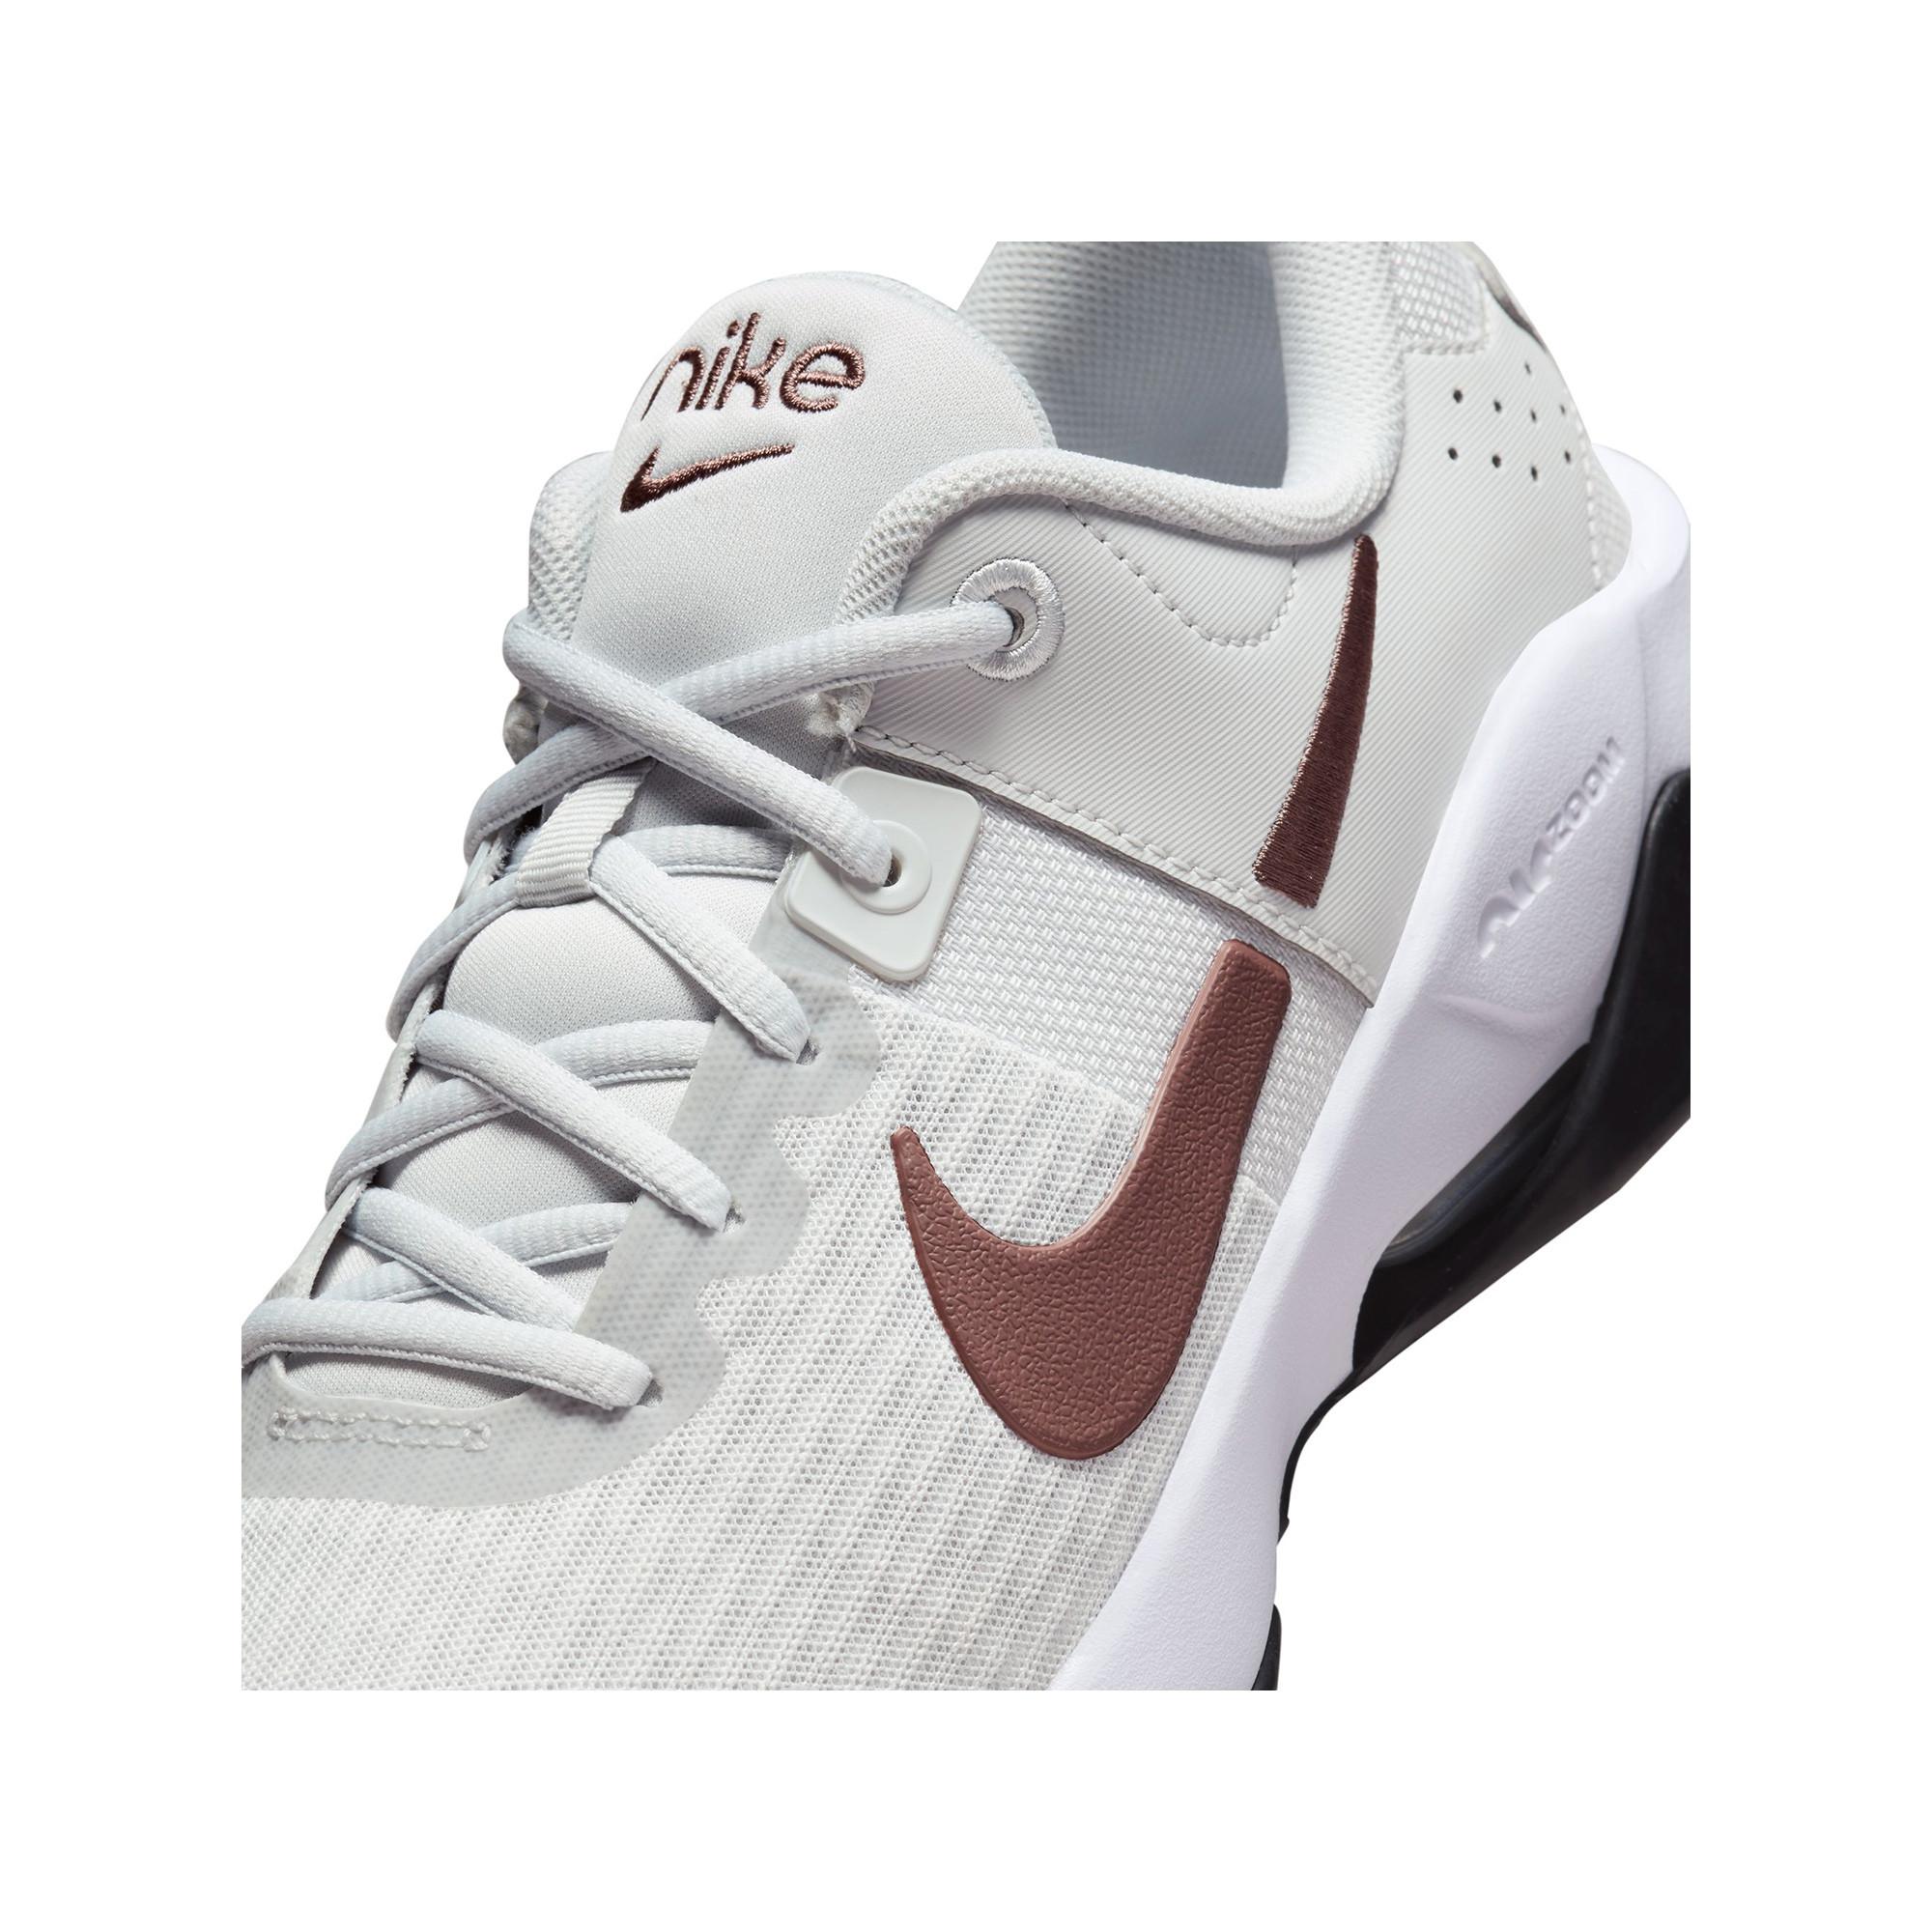 NIKE Wmns Zoom Bella 6 Chaussures fitness 